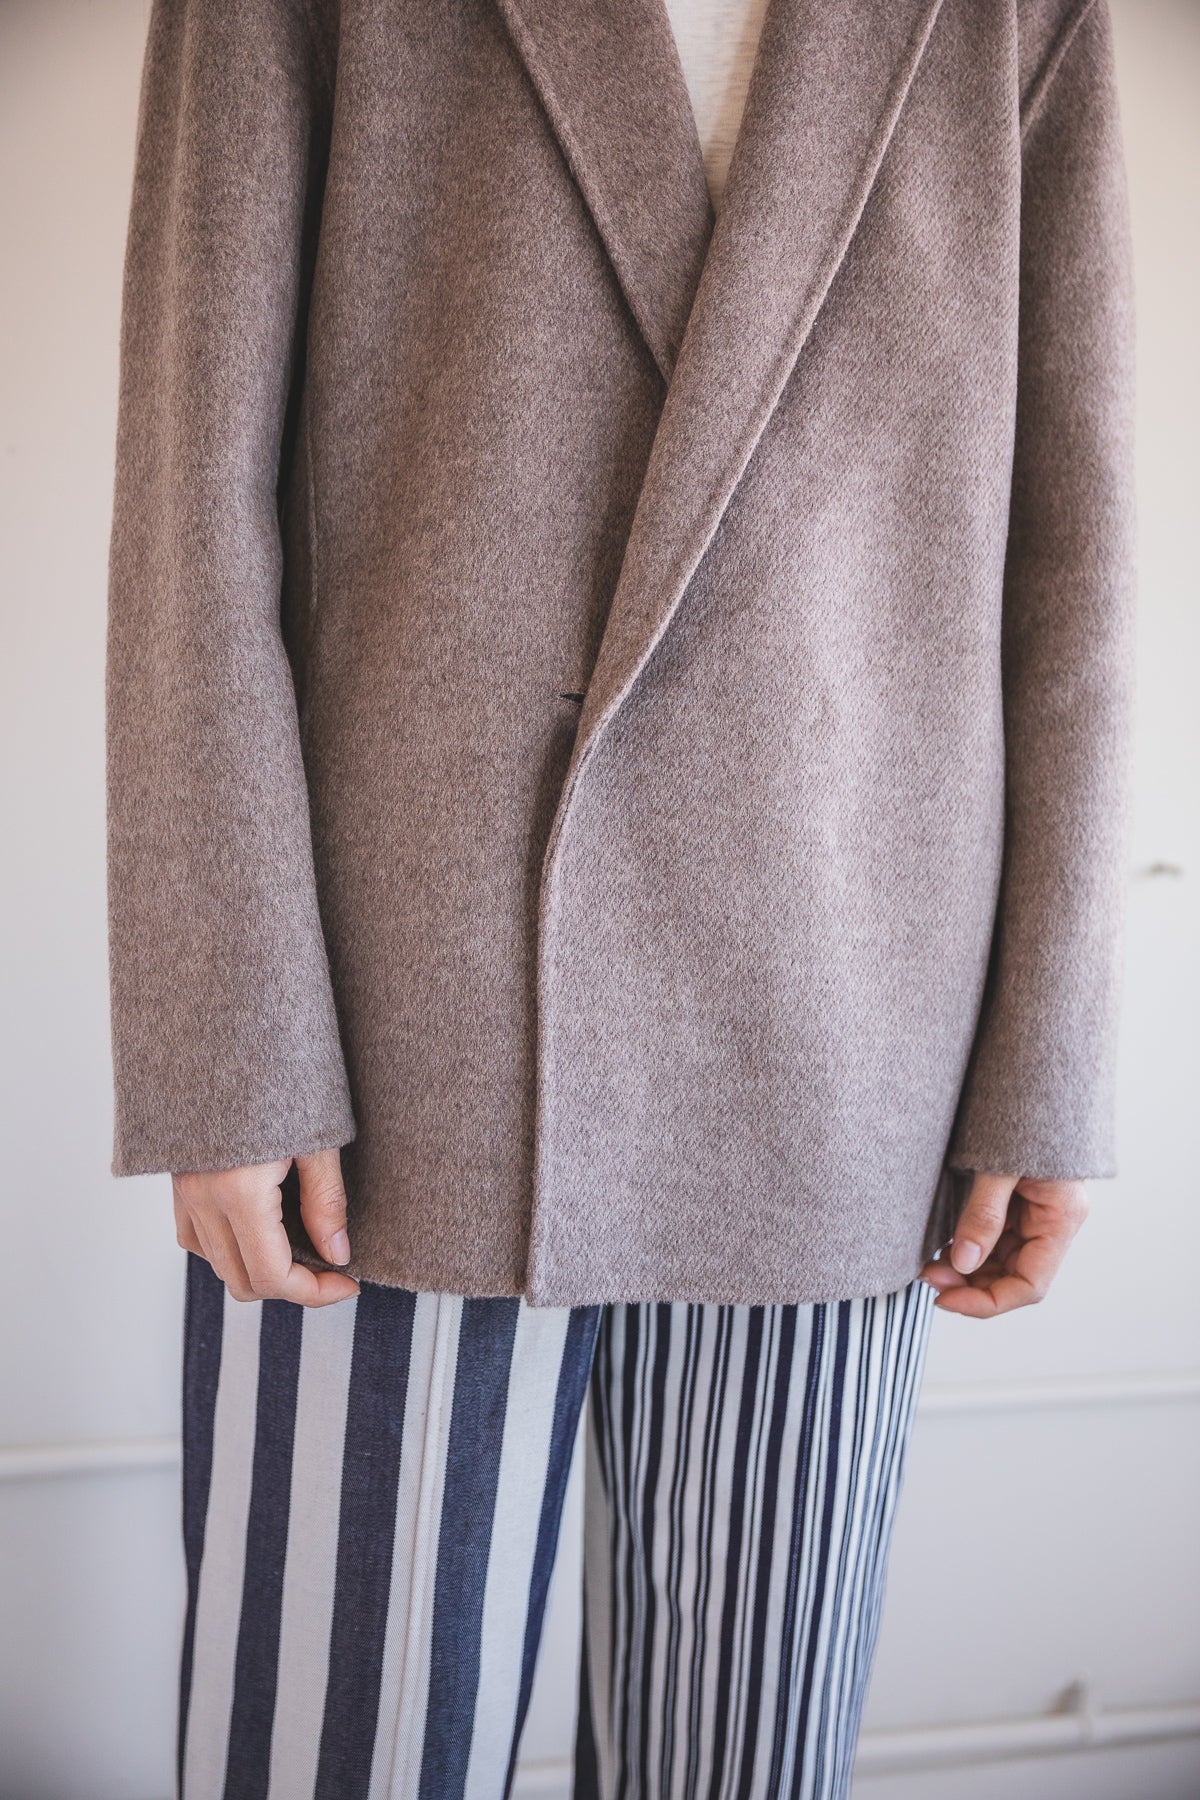 DOUBLE FACE JACKET IN UNDYED GREY YAK WOOL